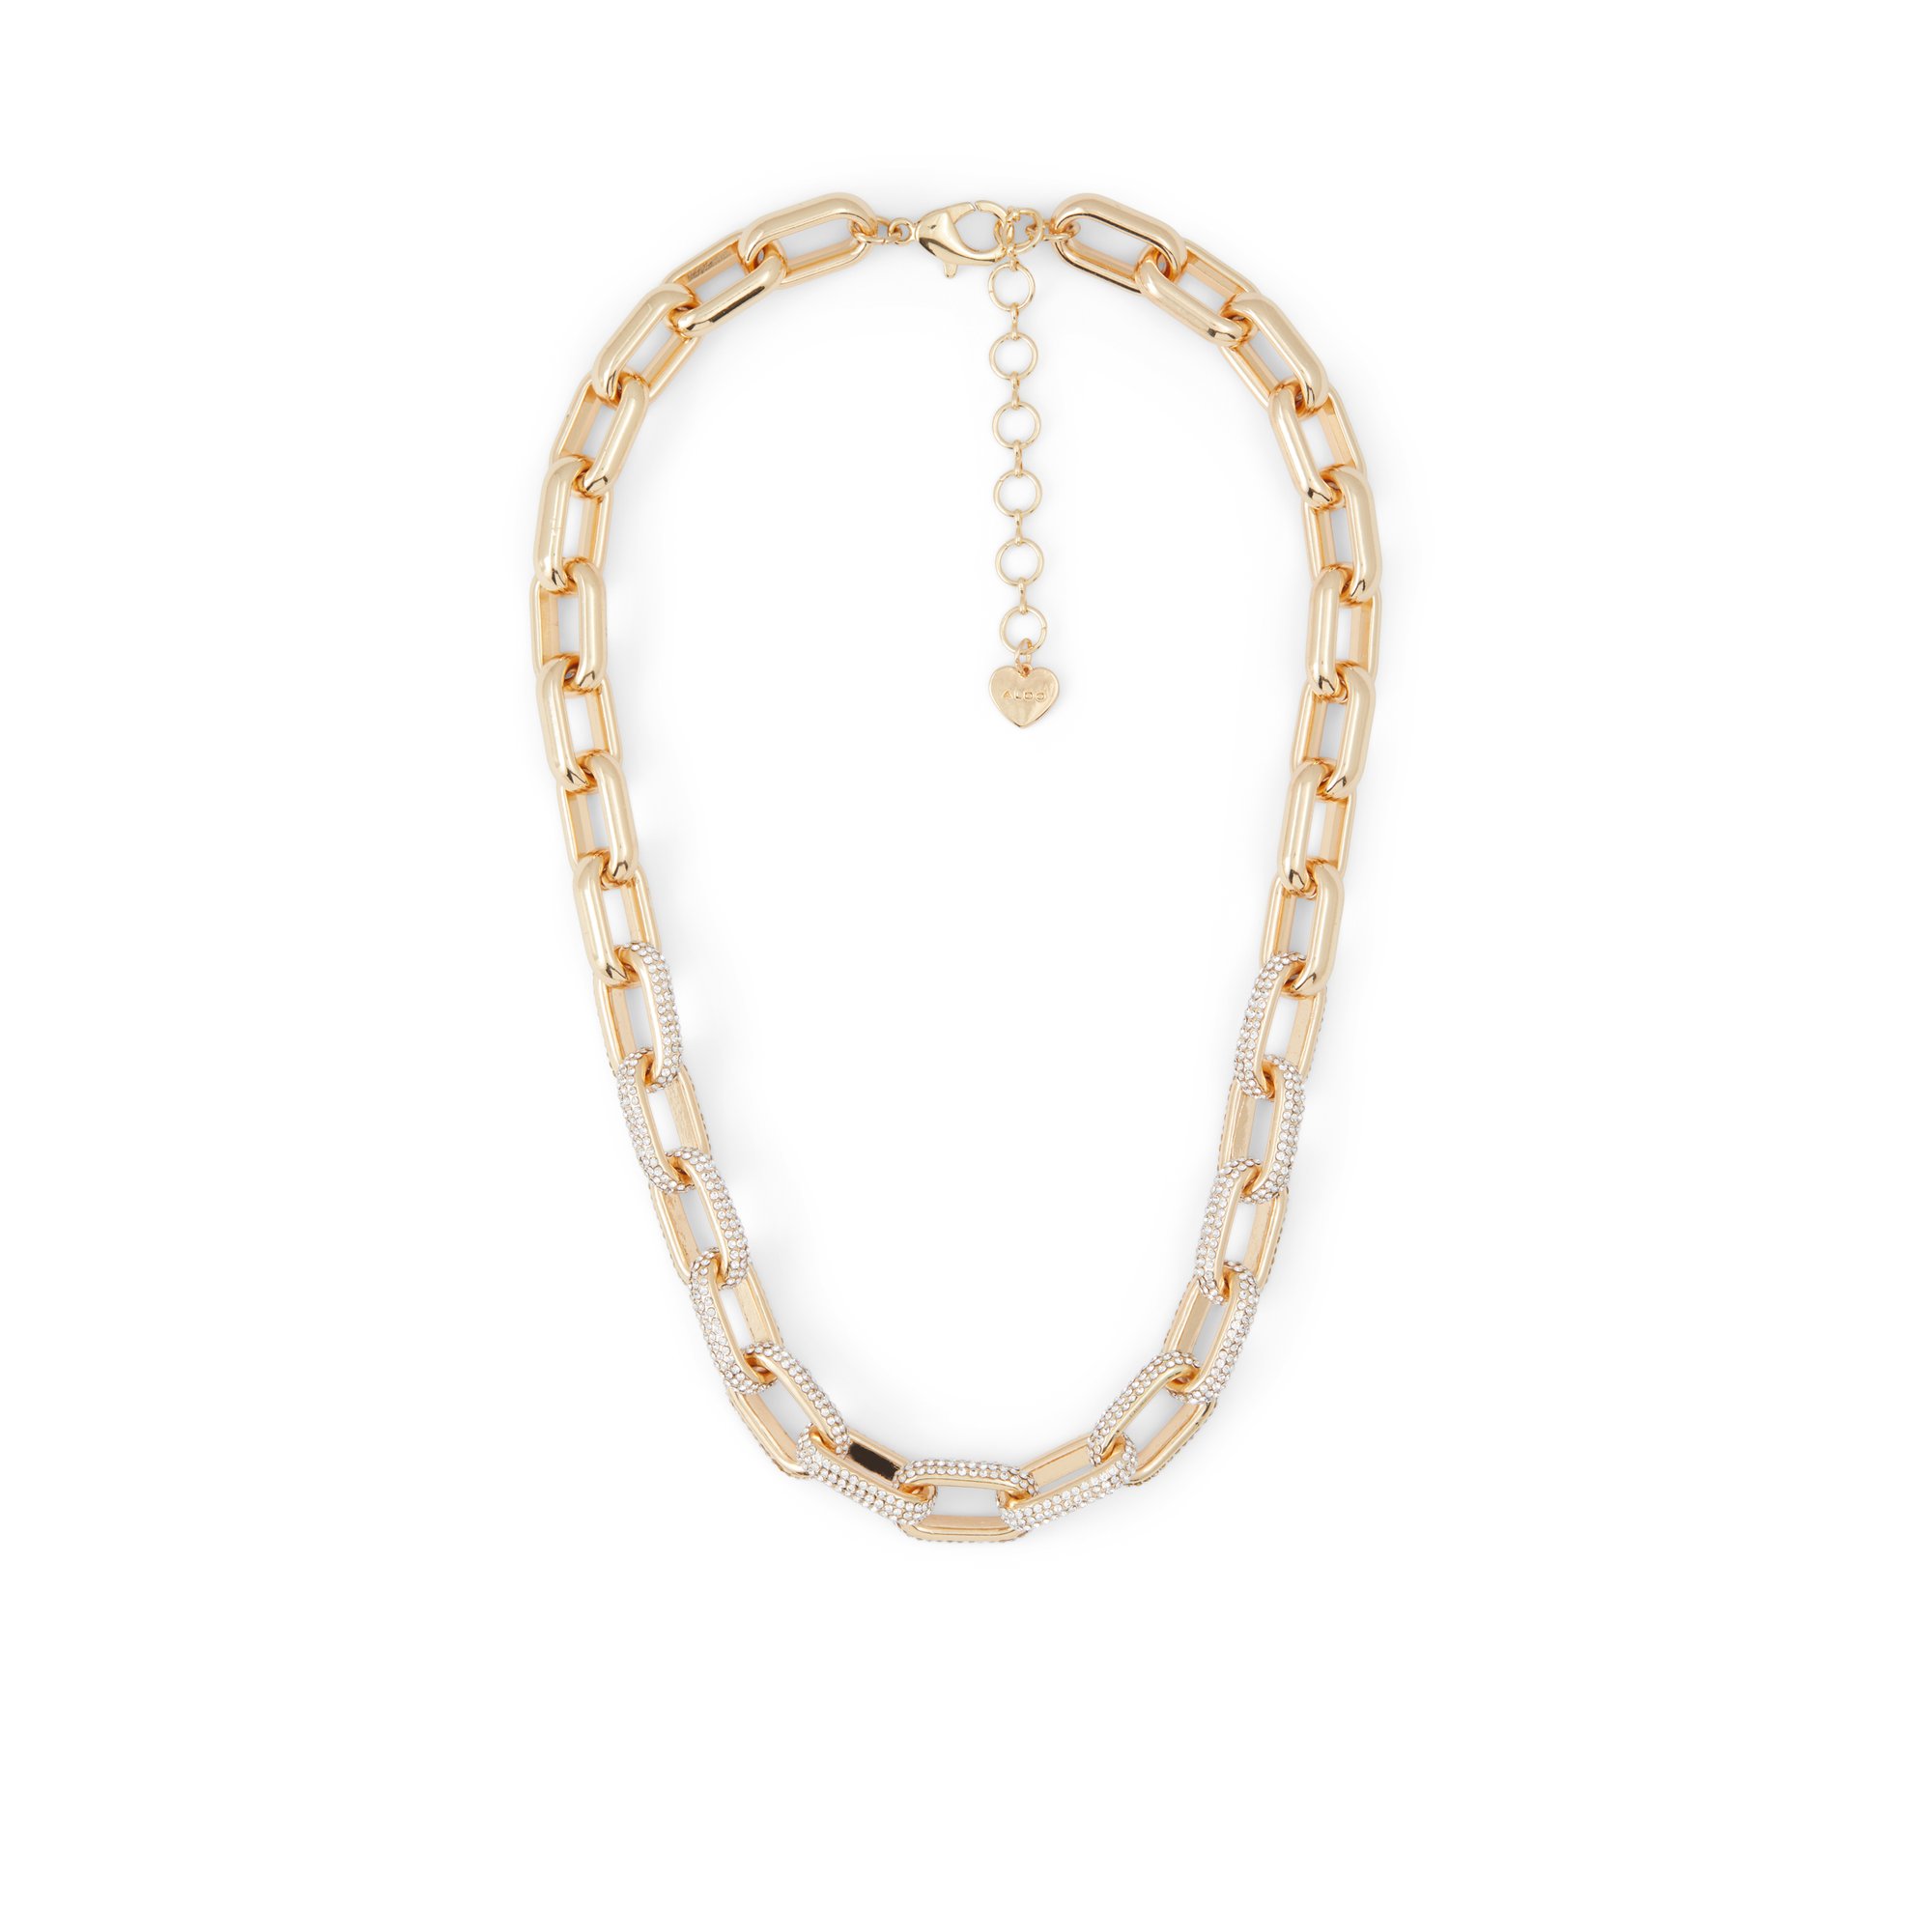 Image of ALDO Adoan - Women's Necklace Jewelry - Gold-Clear